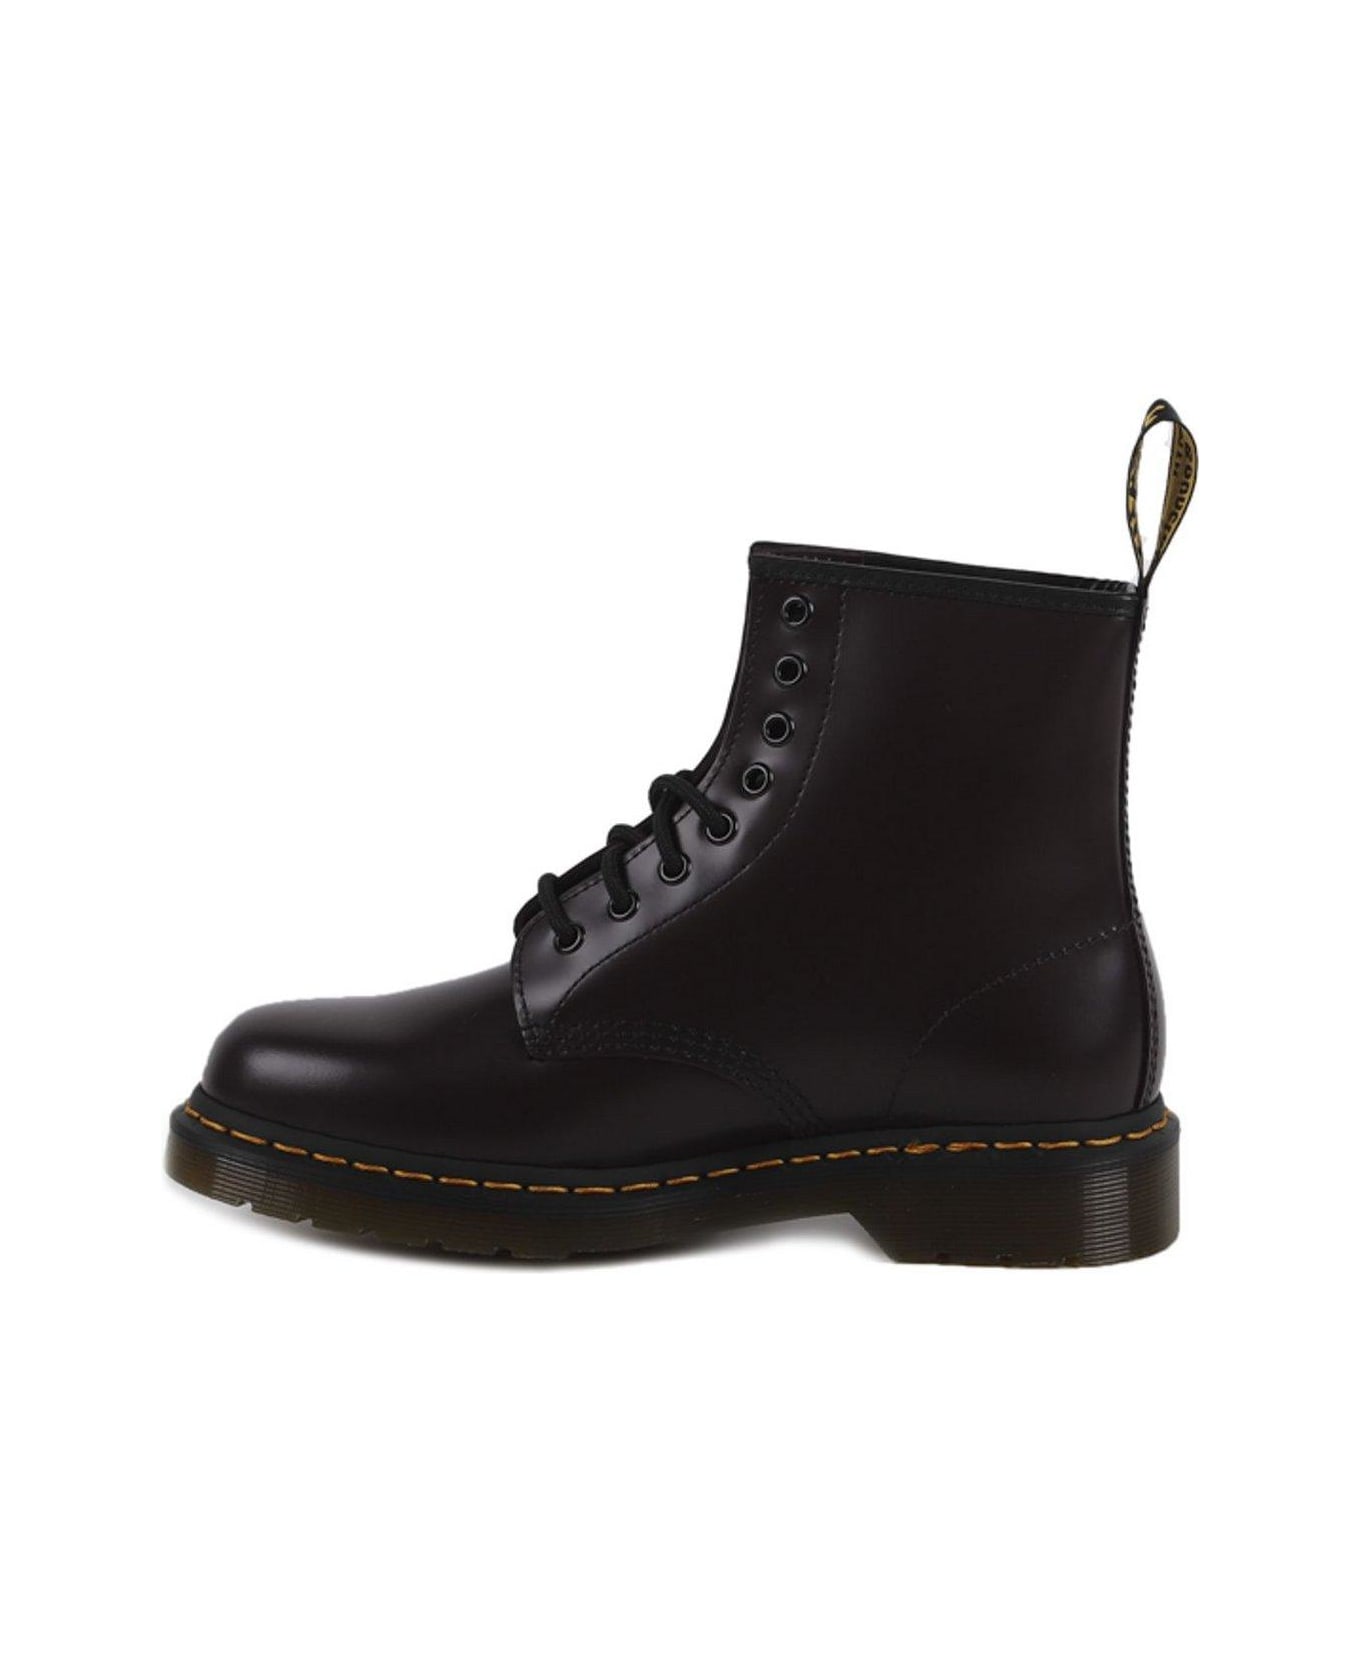 Dr. Martens 1460 Round Toe Lace-up Boots - Burgundy